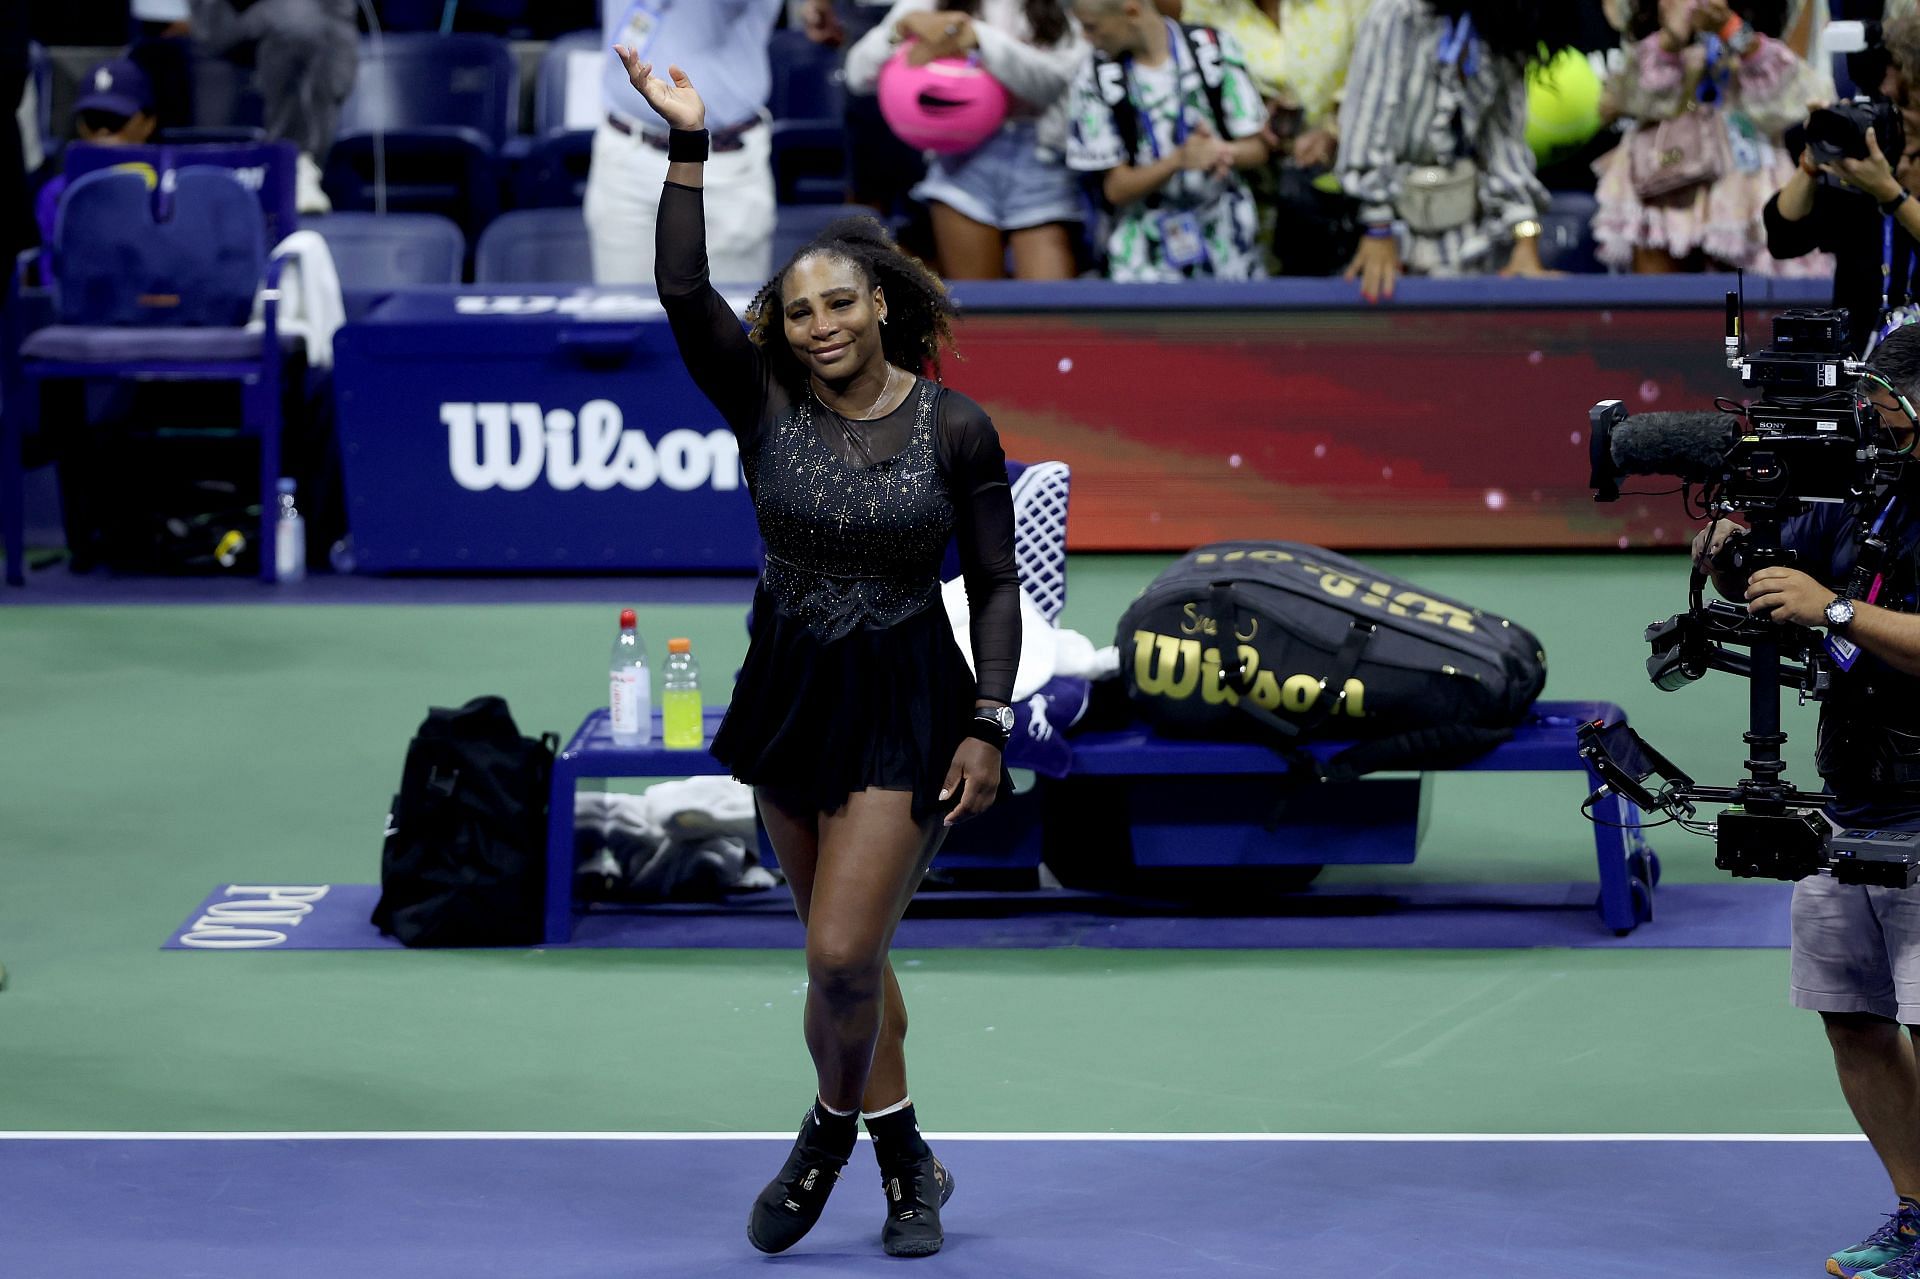 Serena Williams is one of the greatest sportspersons of all time